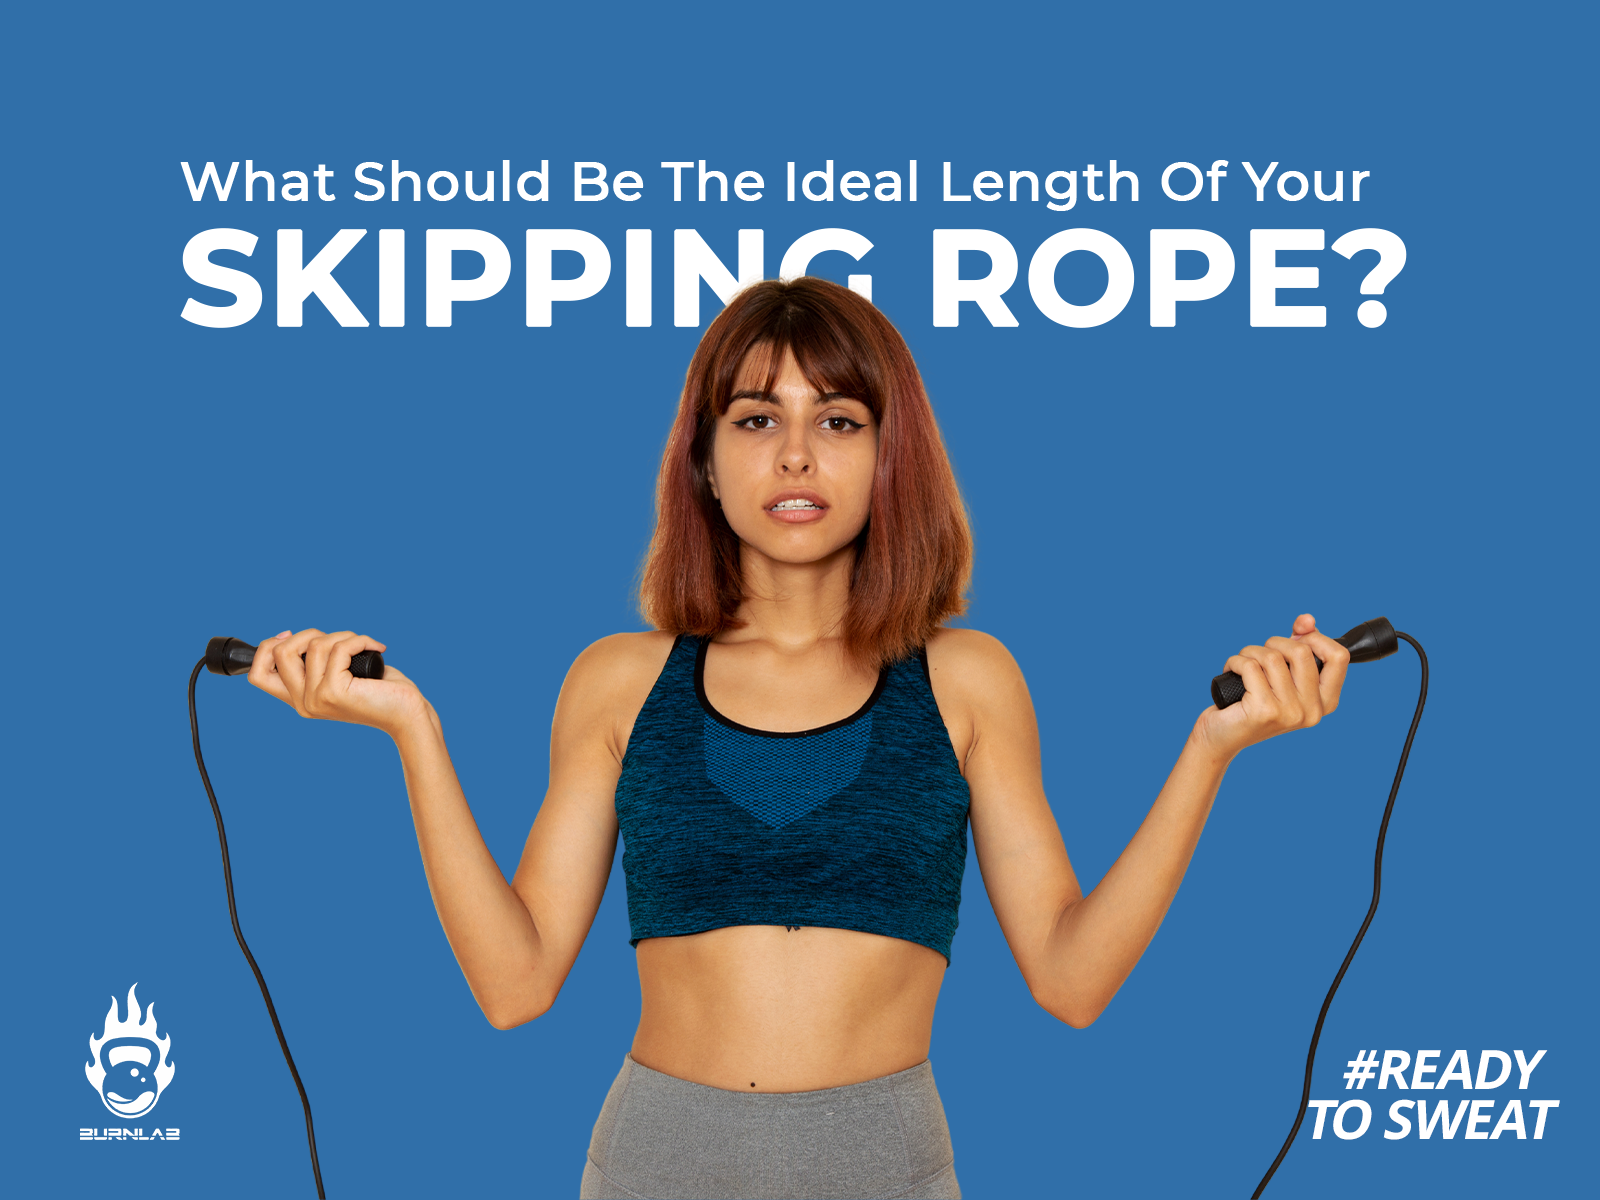 What Should Be The Ideal Length Of Your Skipping Rope?